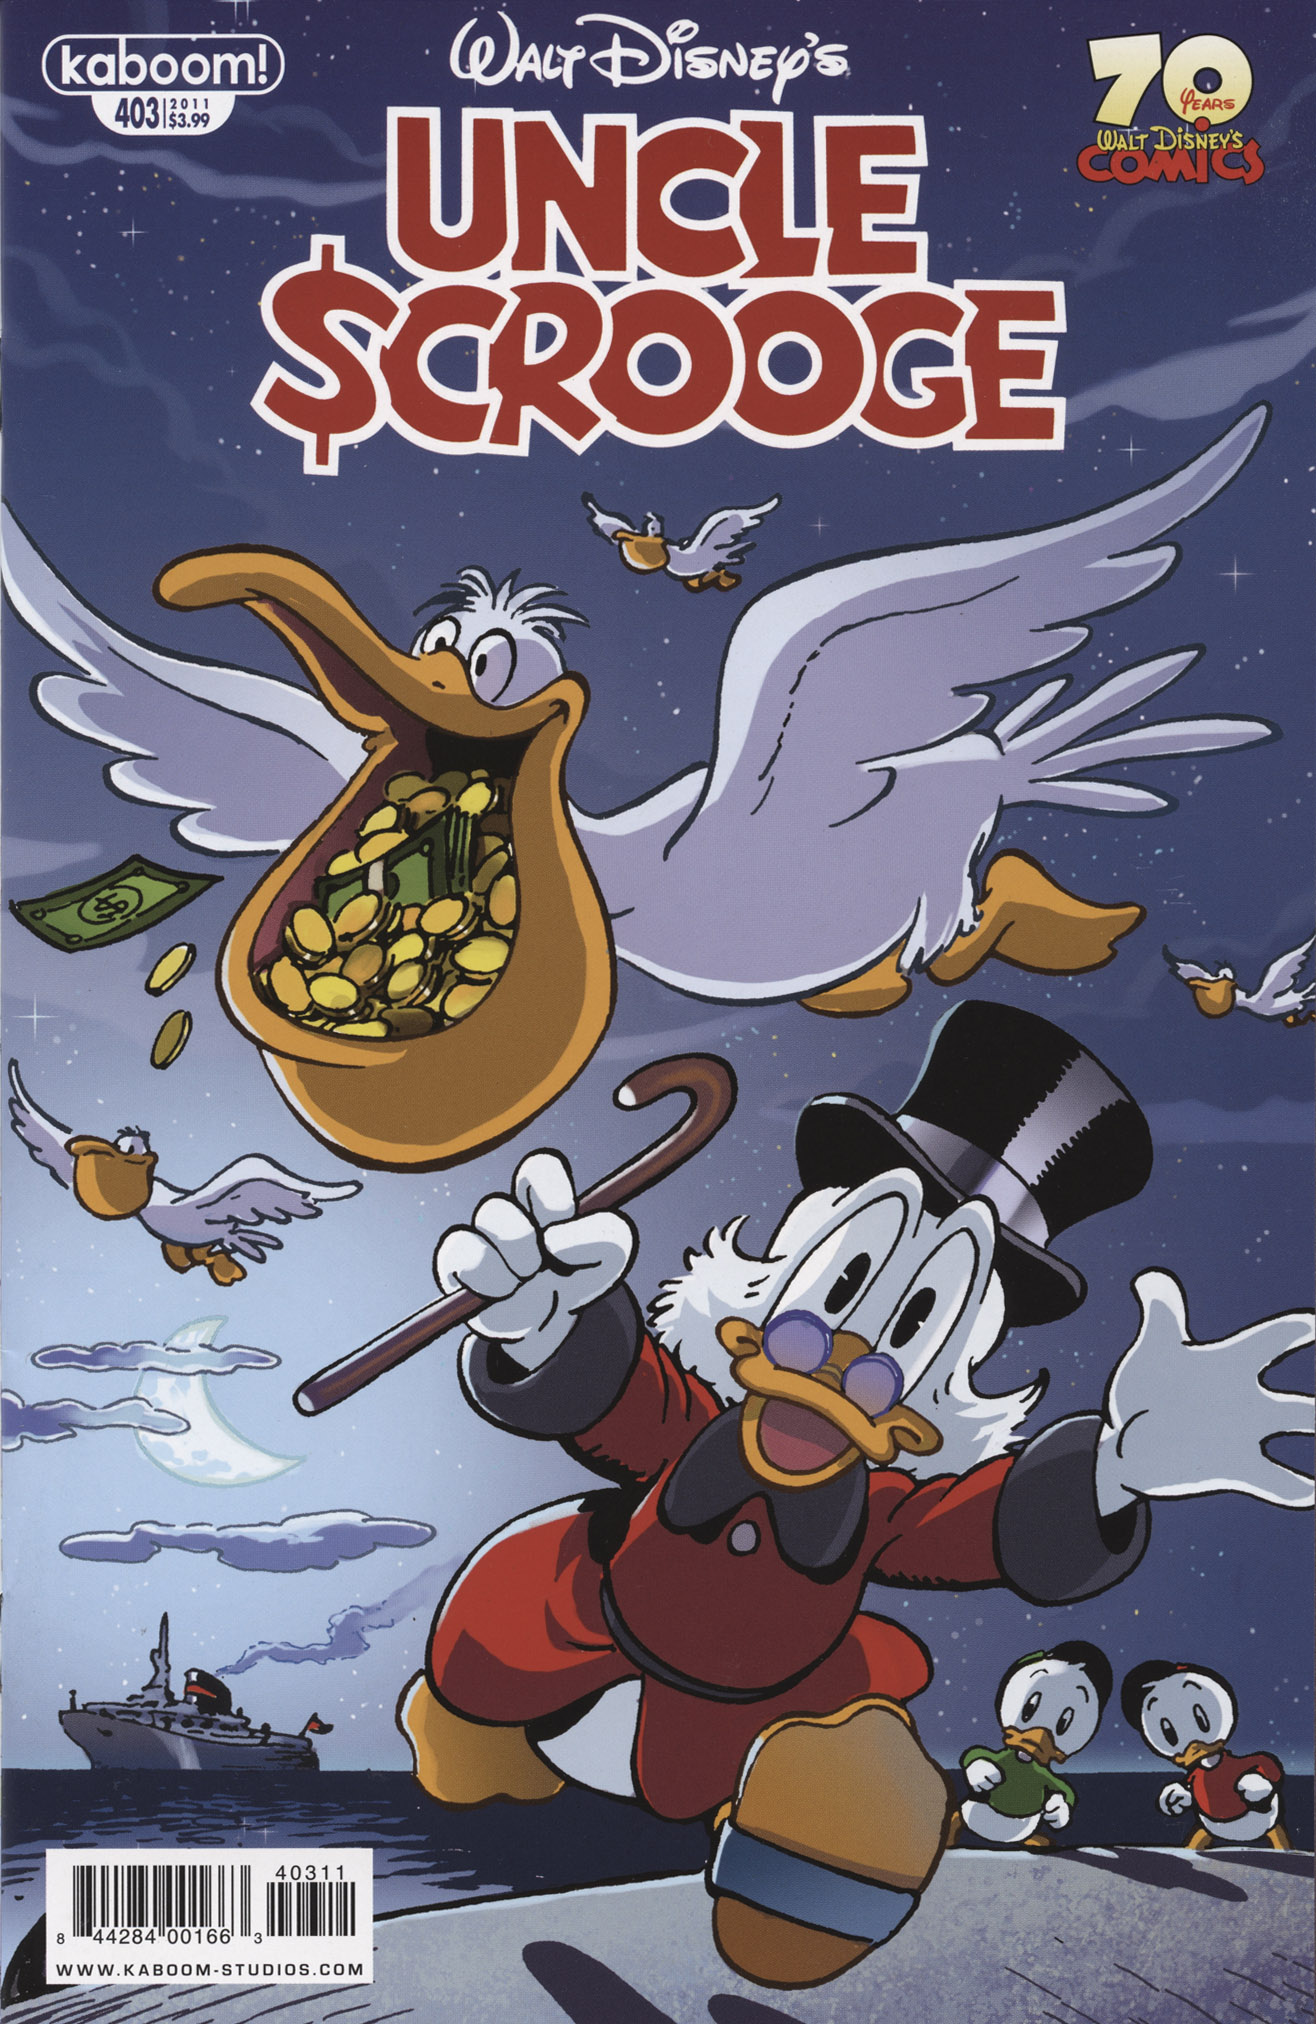 Read online Uncle Scrooge (1953) comic -  Issue #403 - 1